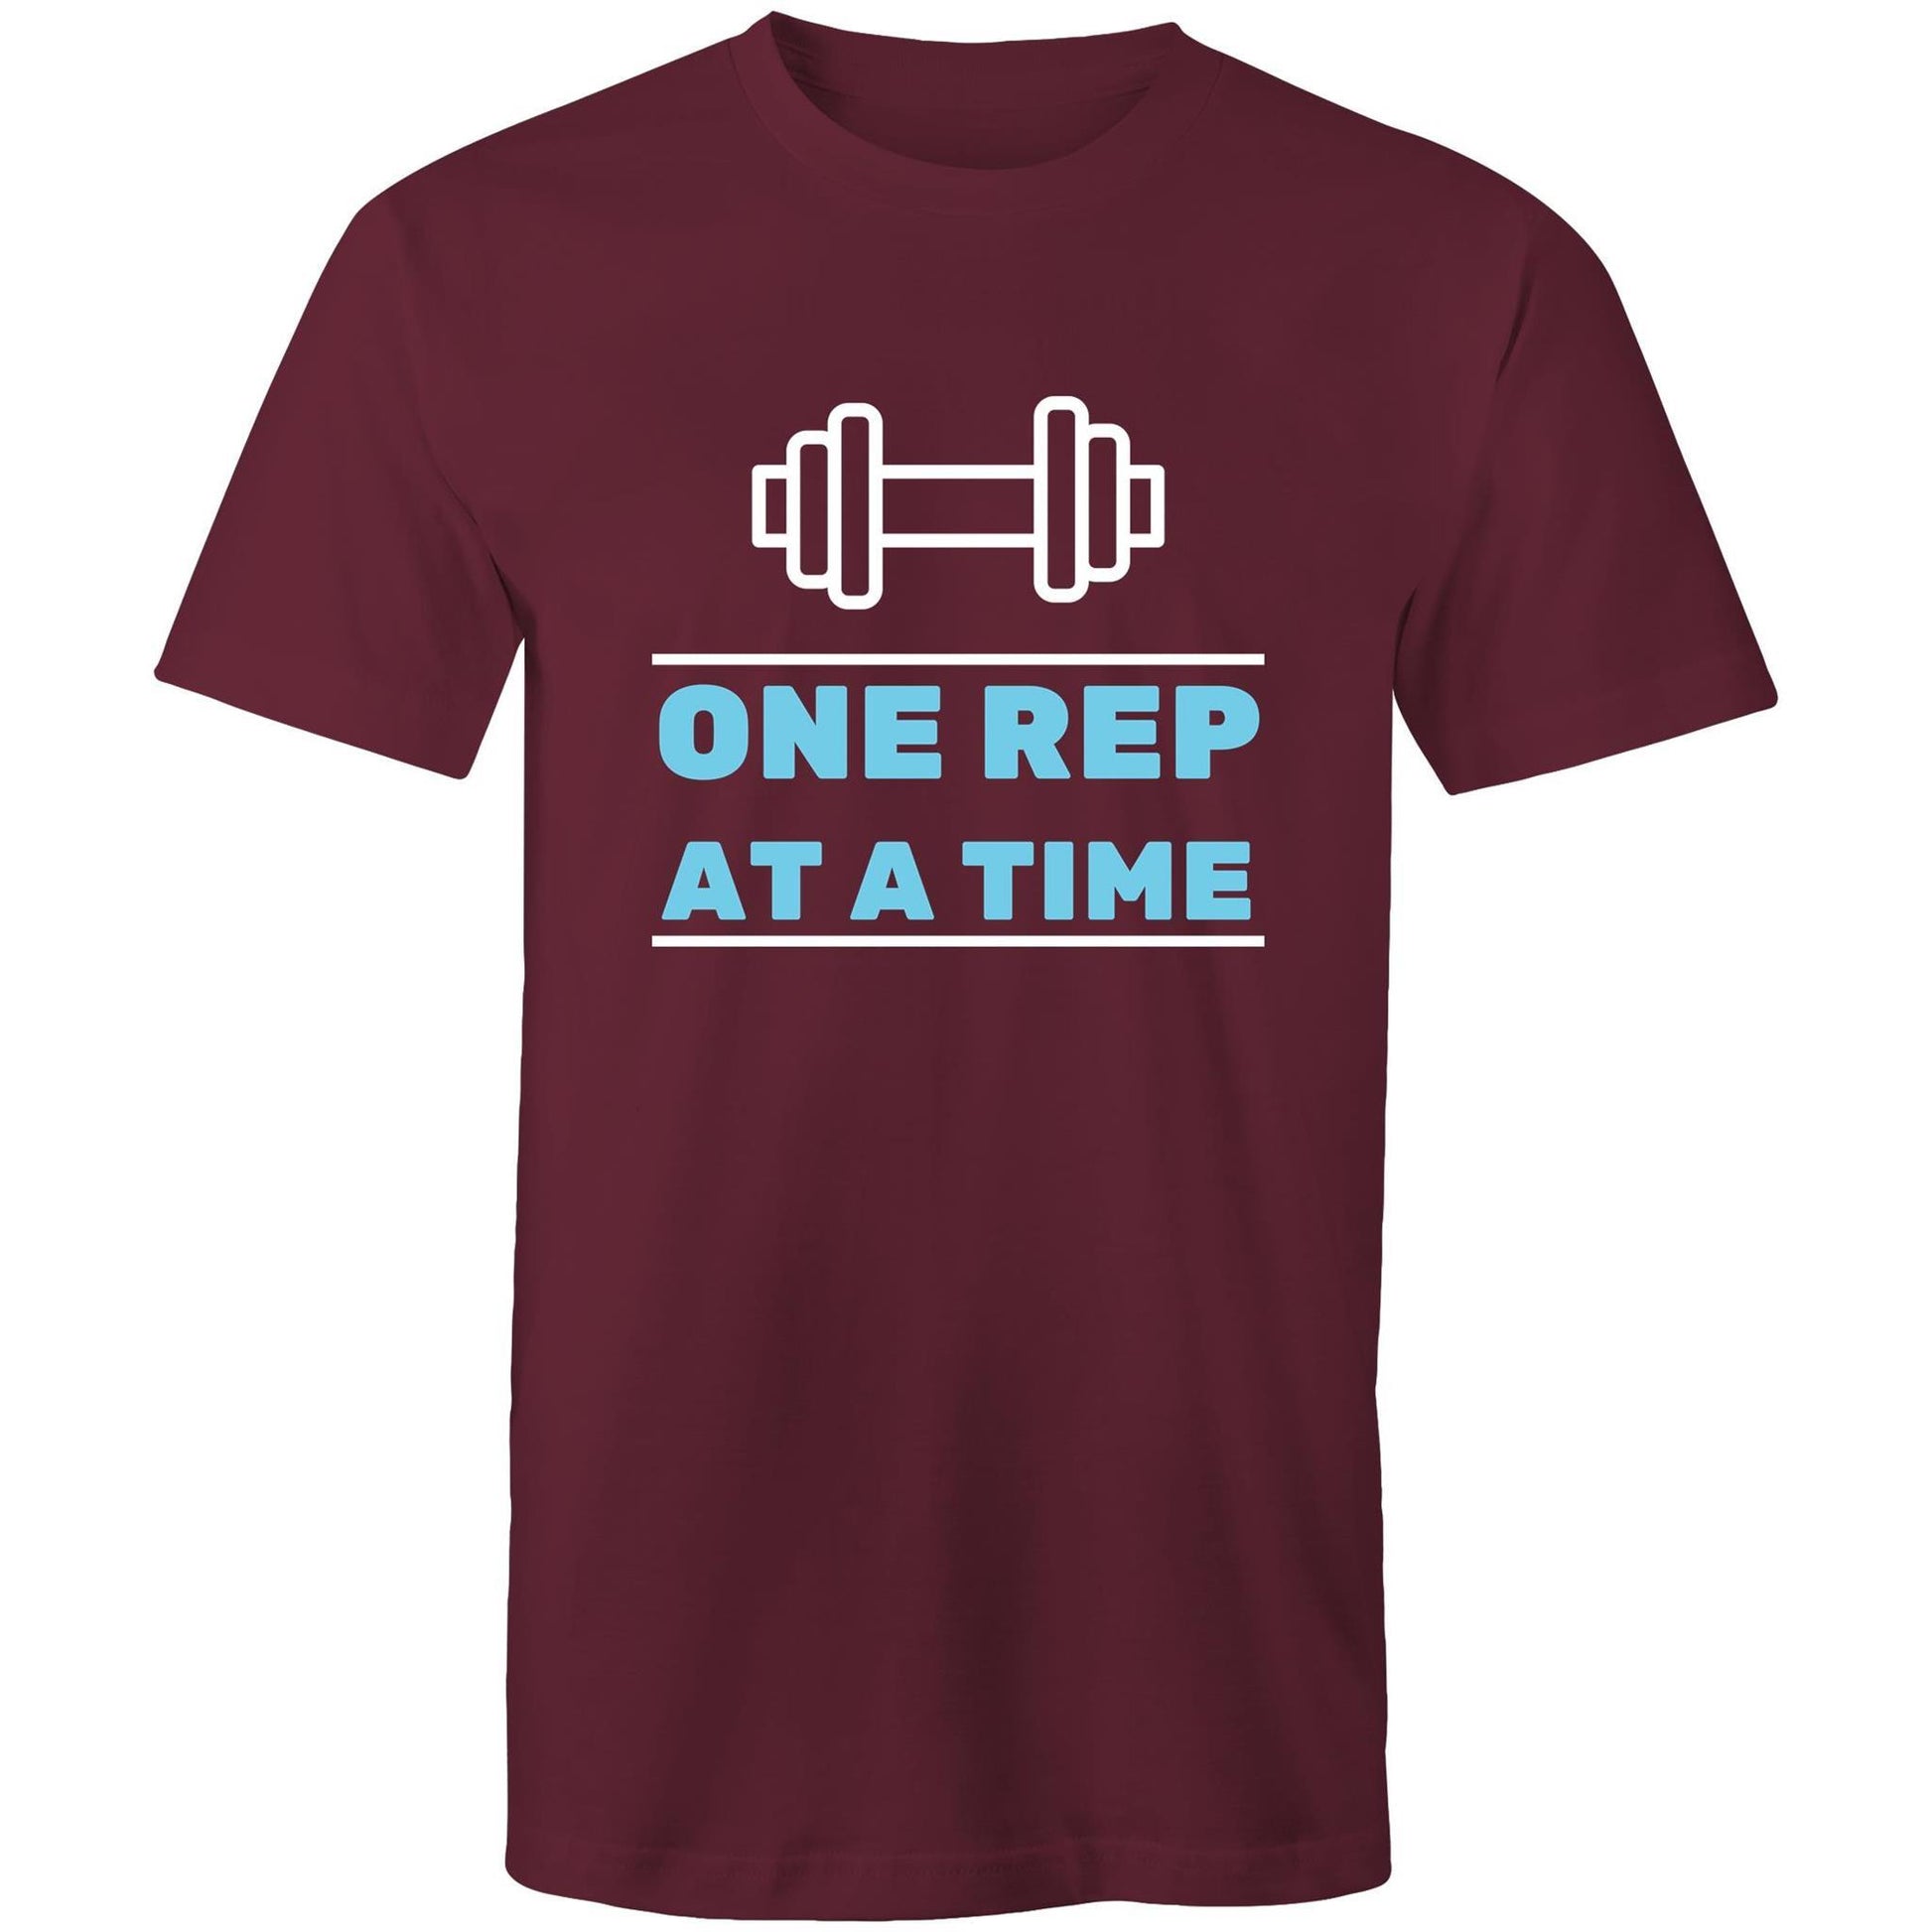 One Rep At A Time - Short Sleeve T-shirt Burgundy Fitness T-shirt Fitness Mens Womens